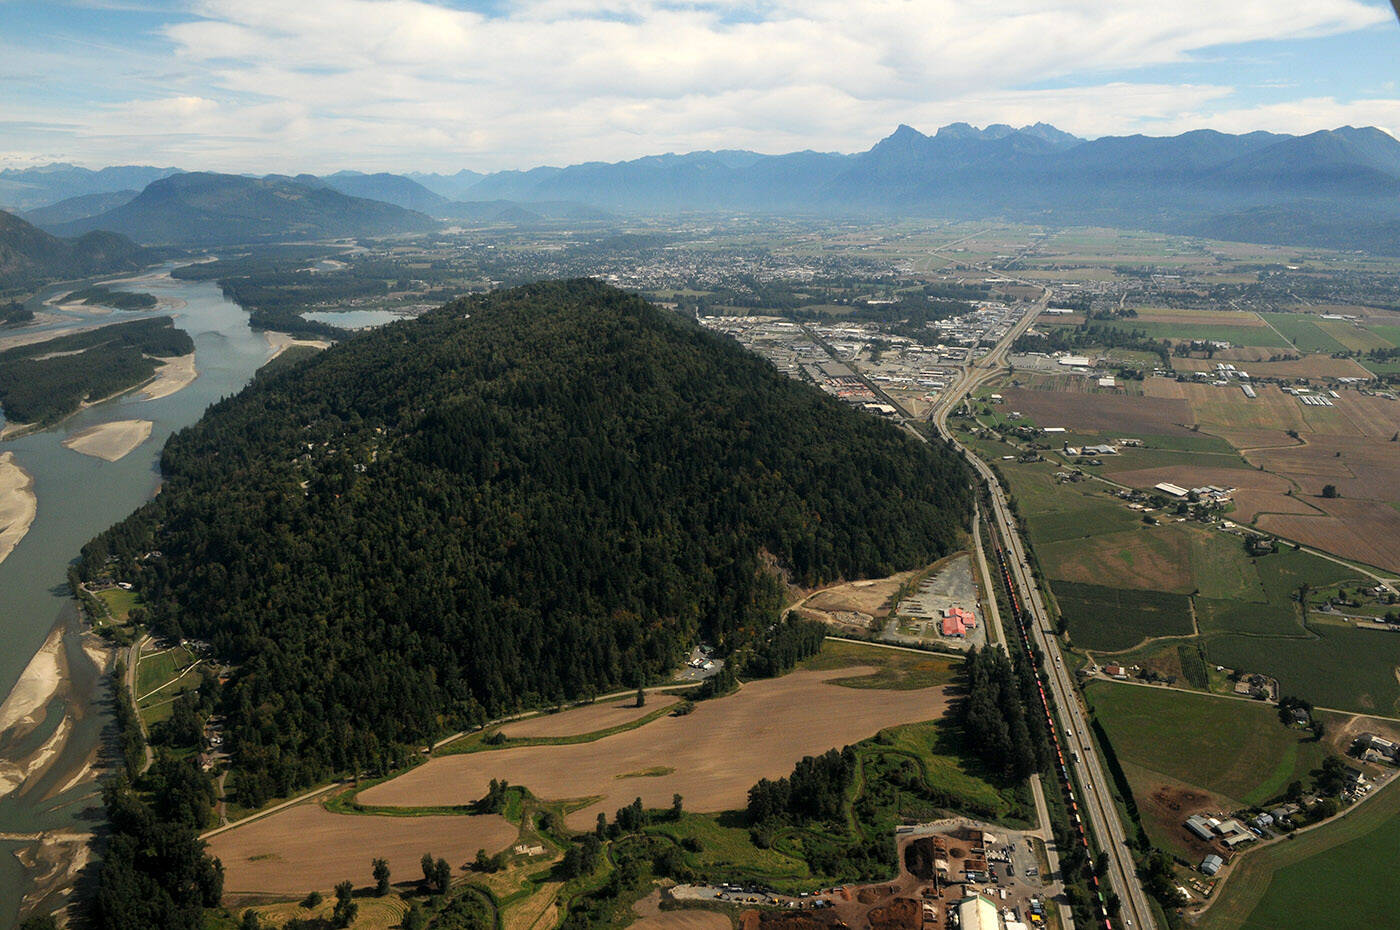 Chilliwack Mountain and Highway 1 looking east on Sept. 9, 2021. (Jenna Hauck/ Chilliwack Progress)